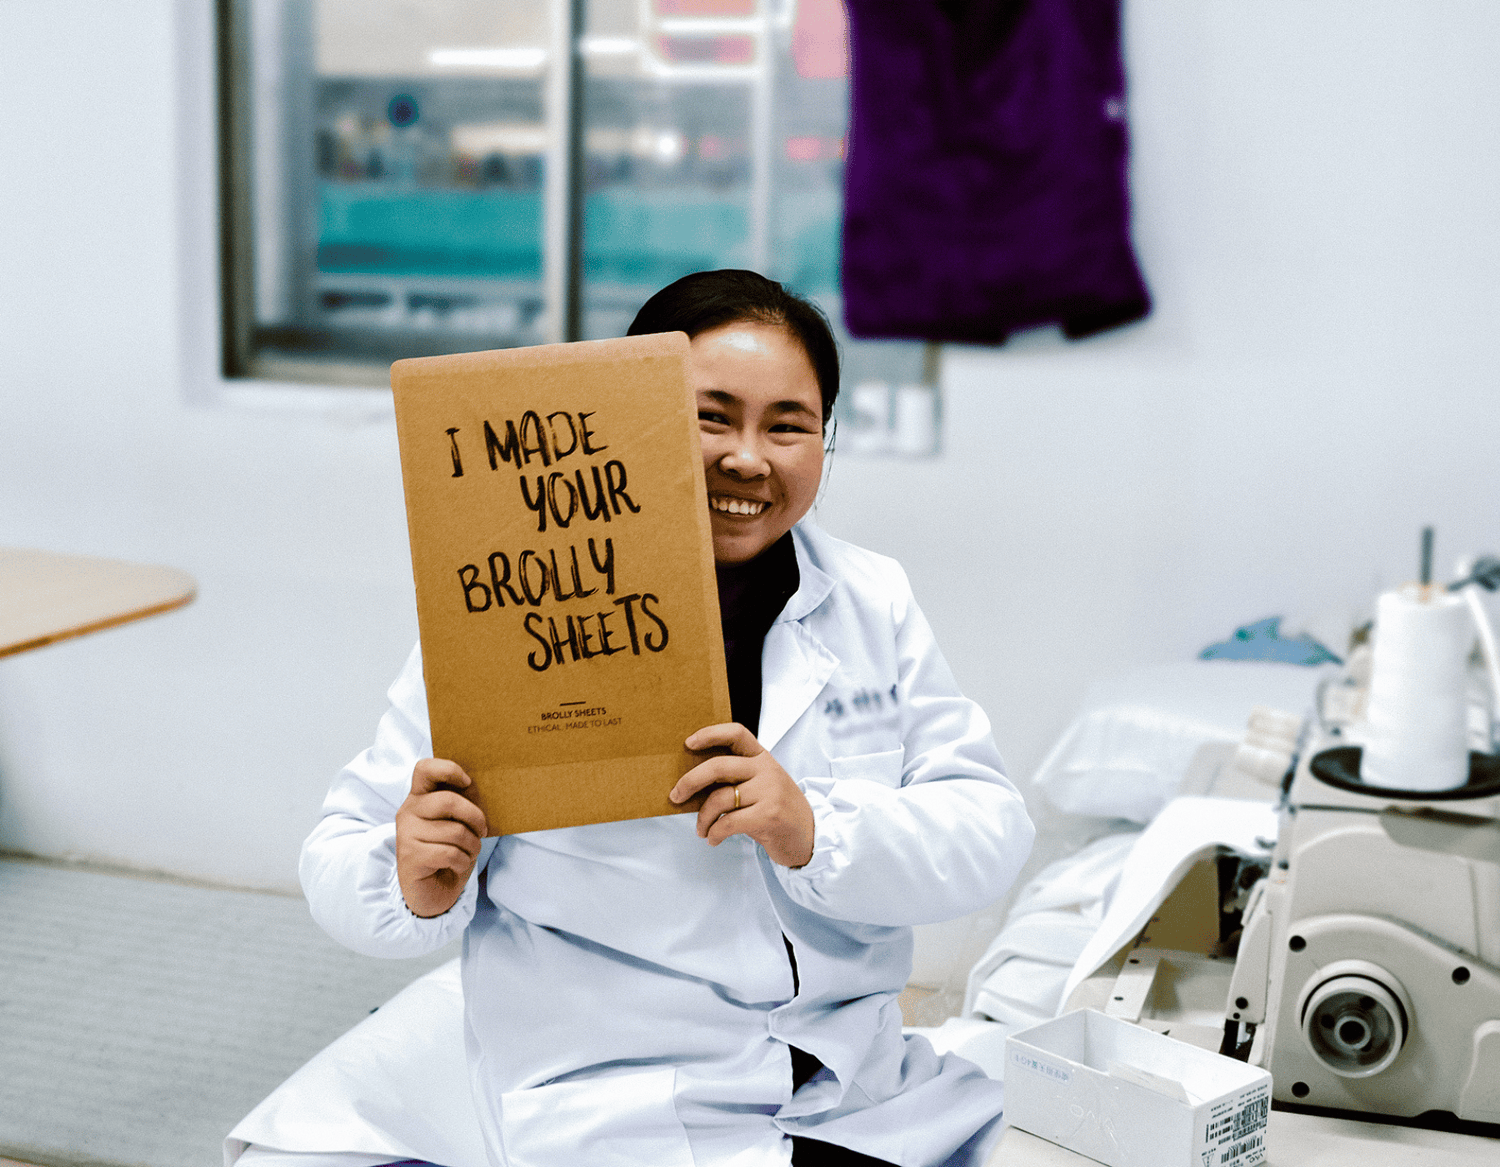 Factory worker at sewing machine holding up a sign with the words "I made your Brolly Sheets"